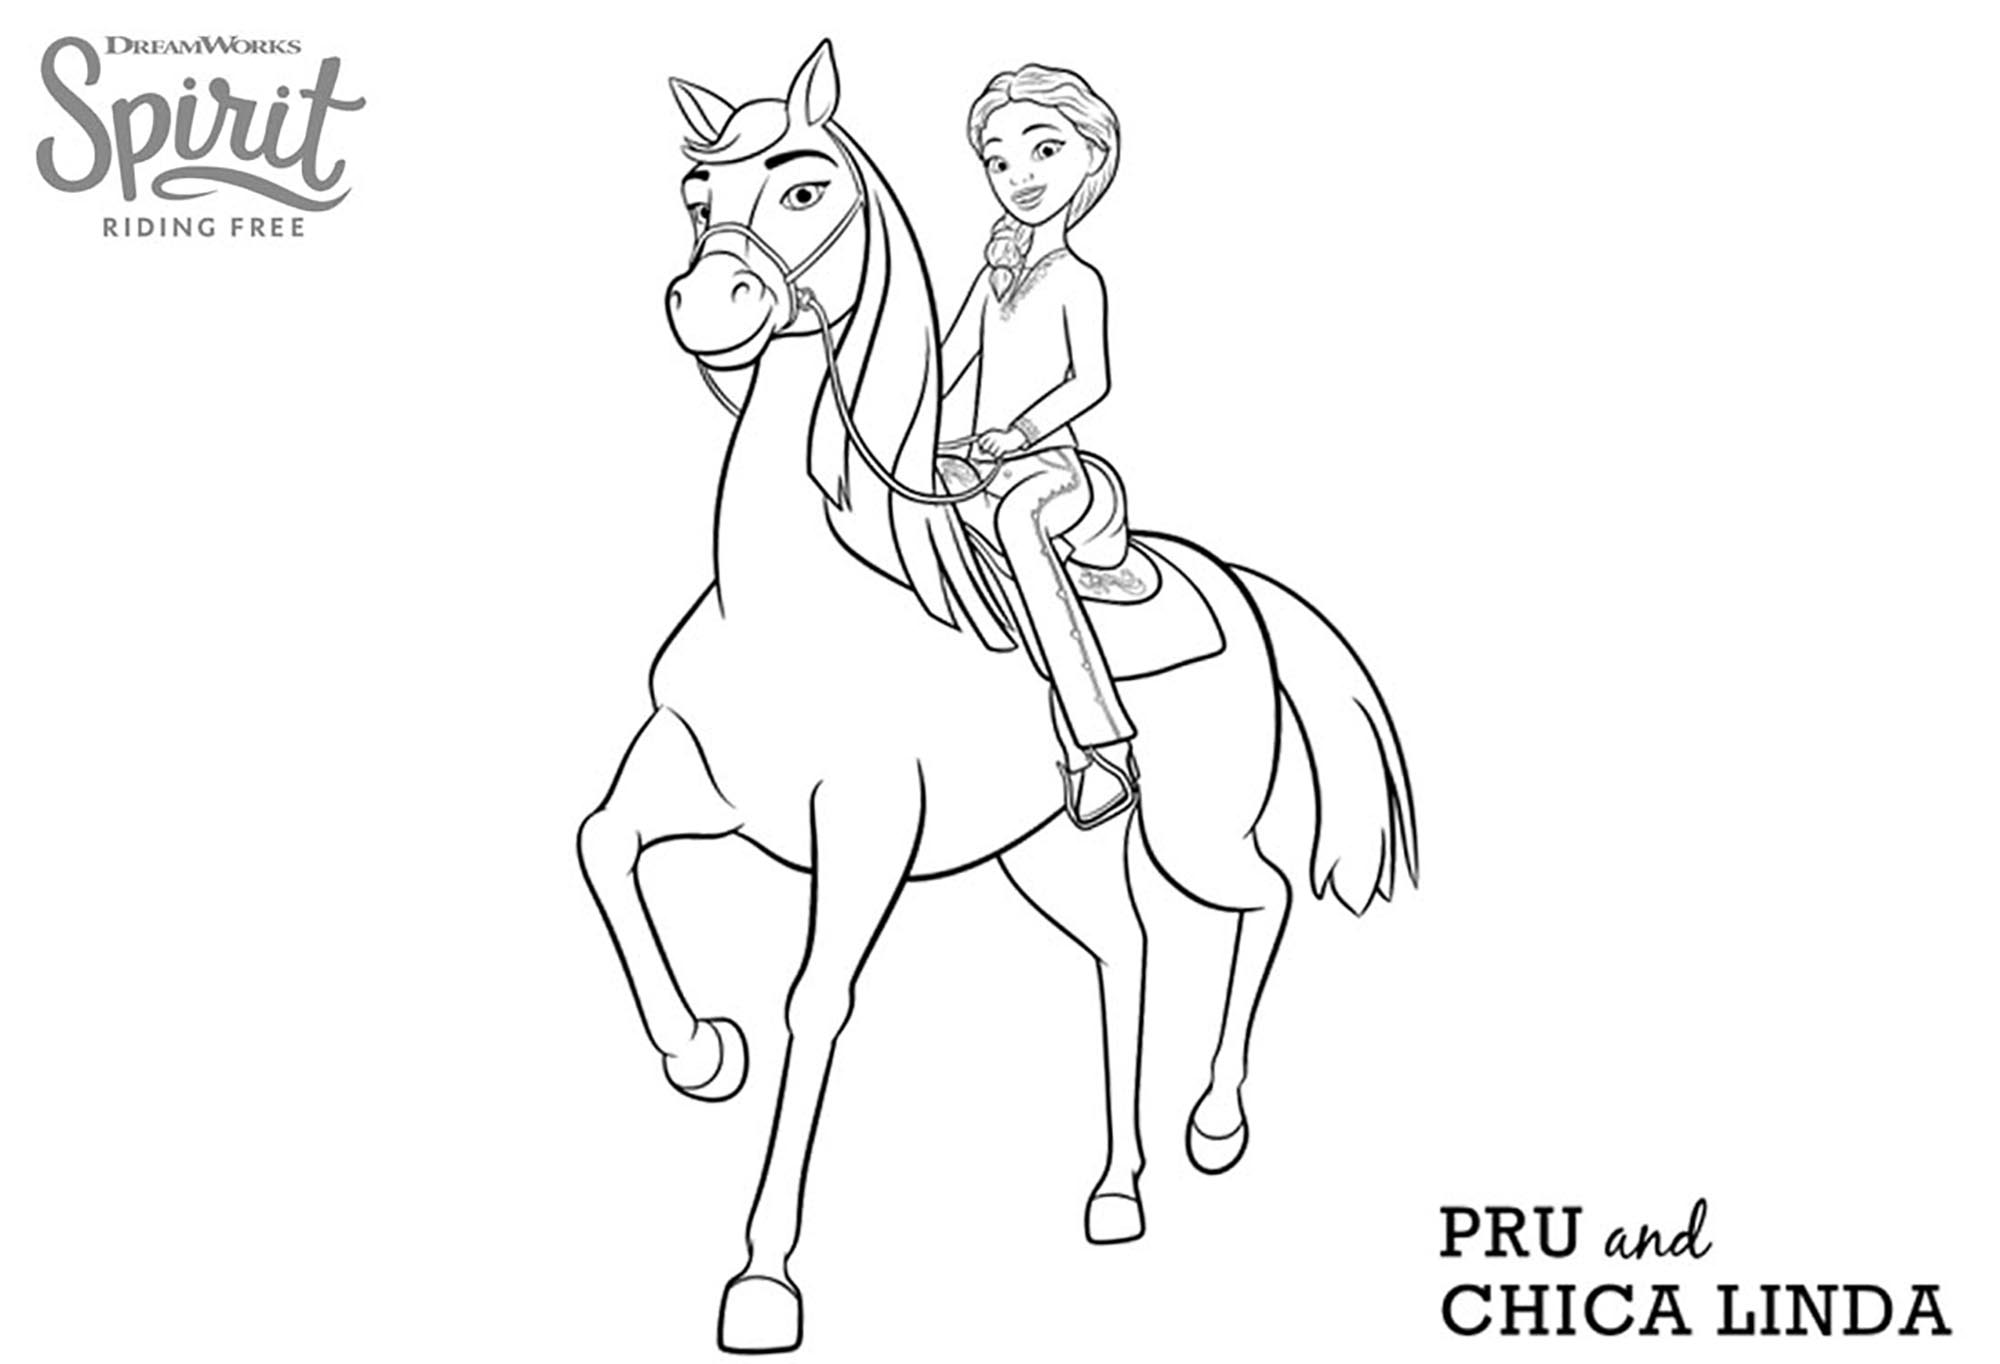 Beautiful Spirit coloring page to print and color